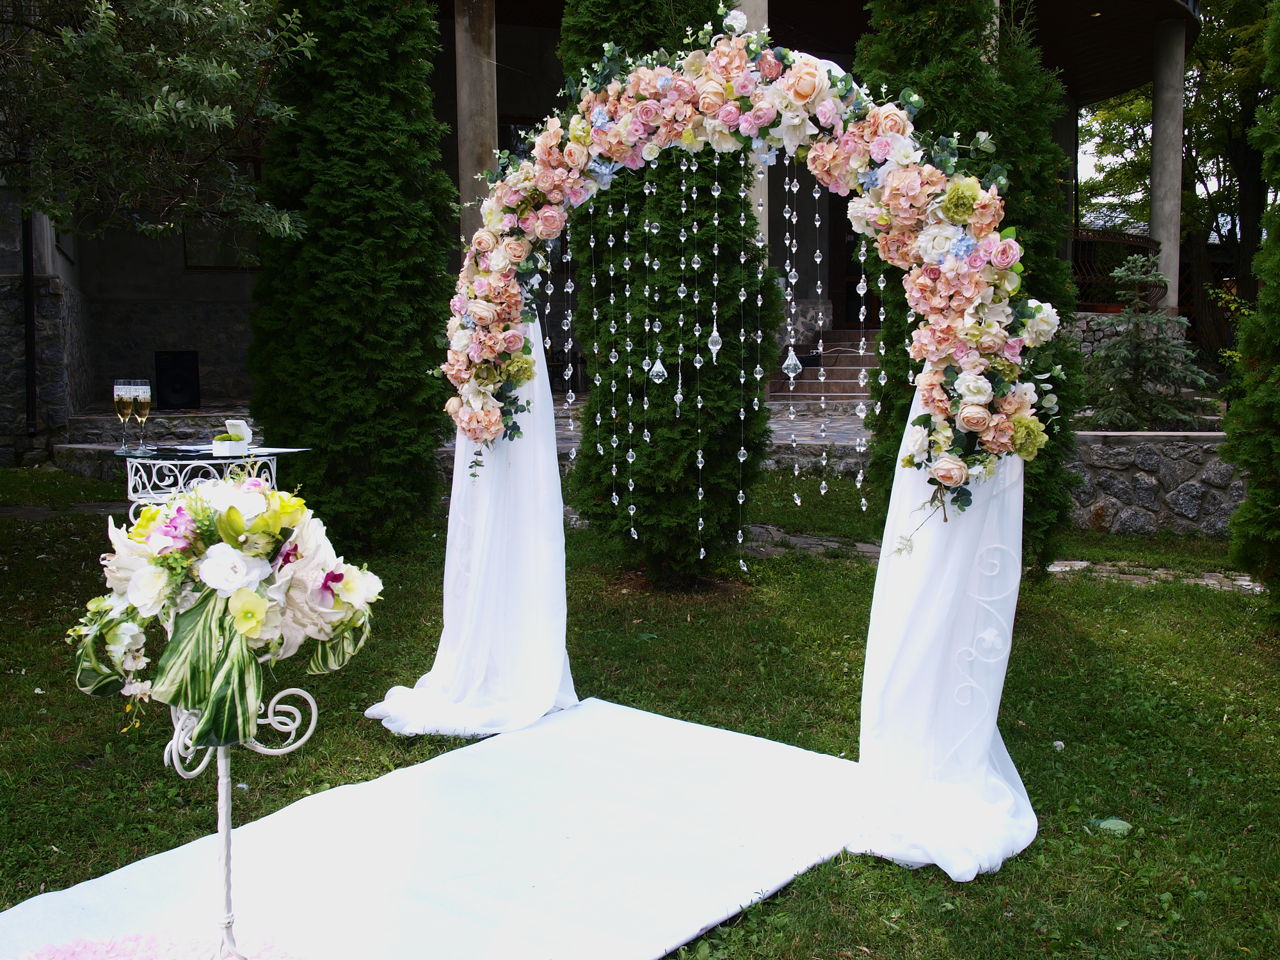 Decorate Arches For A Wedding, How To Decorate Arches For Weddings